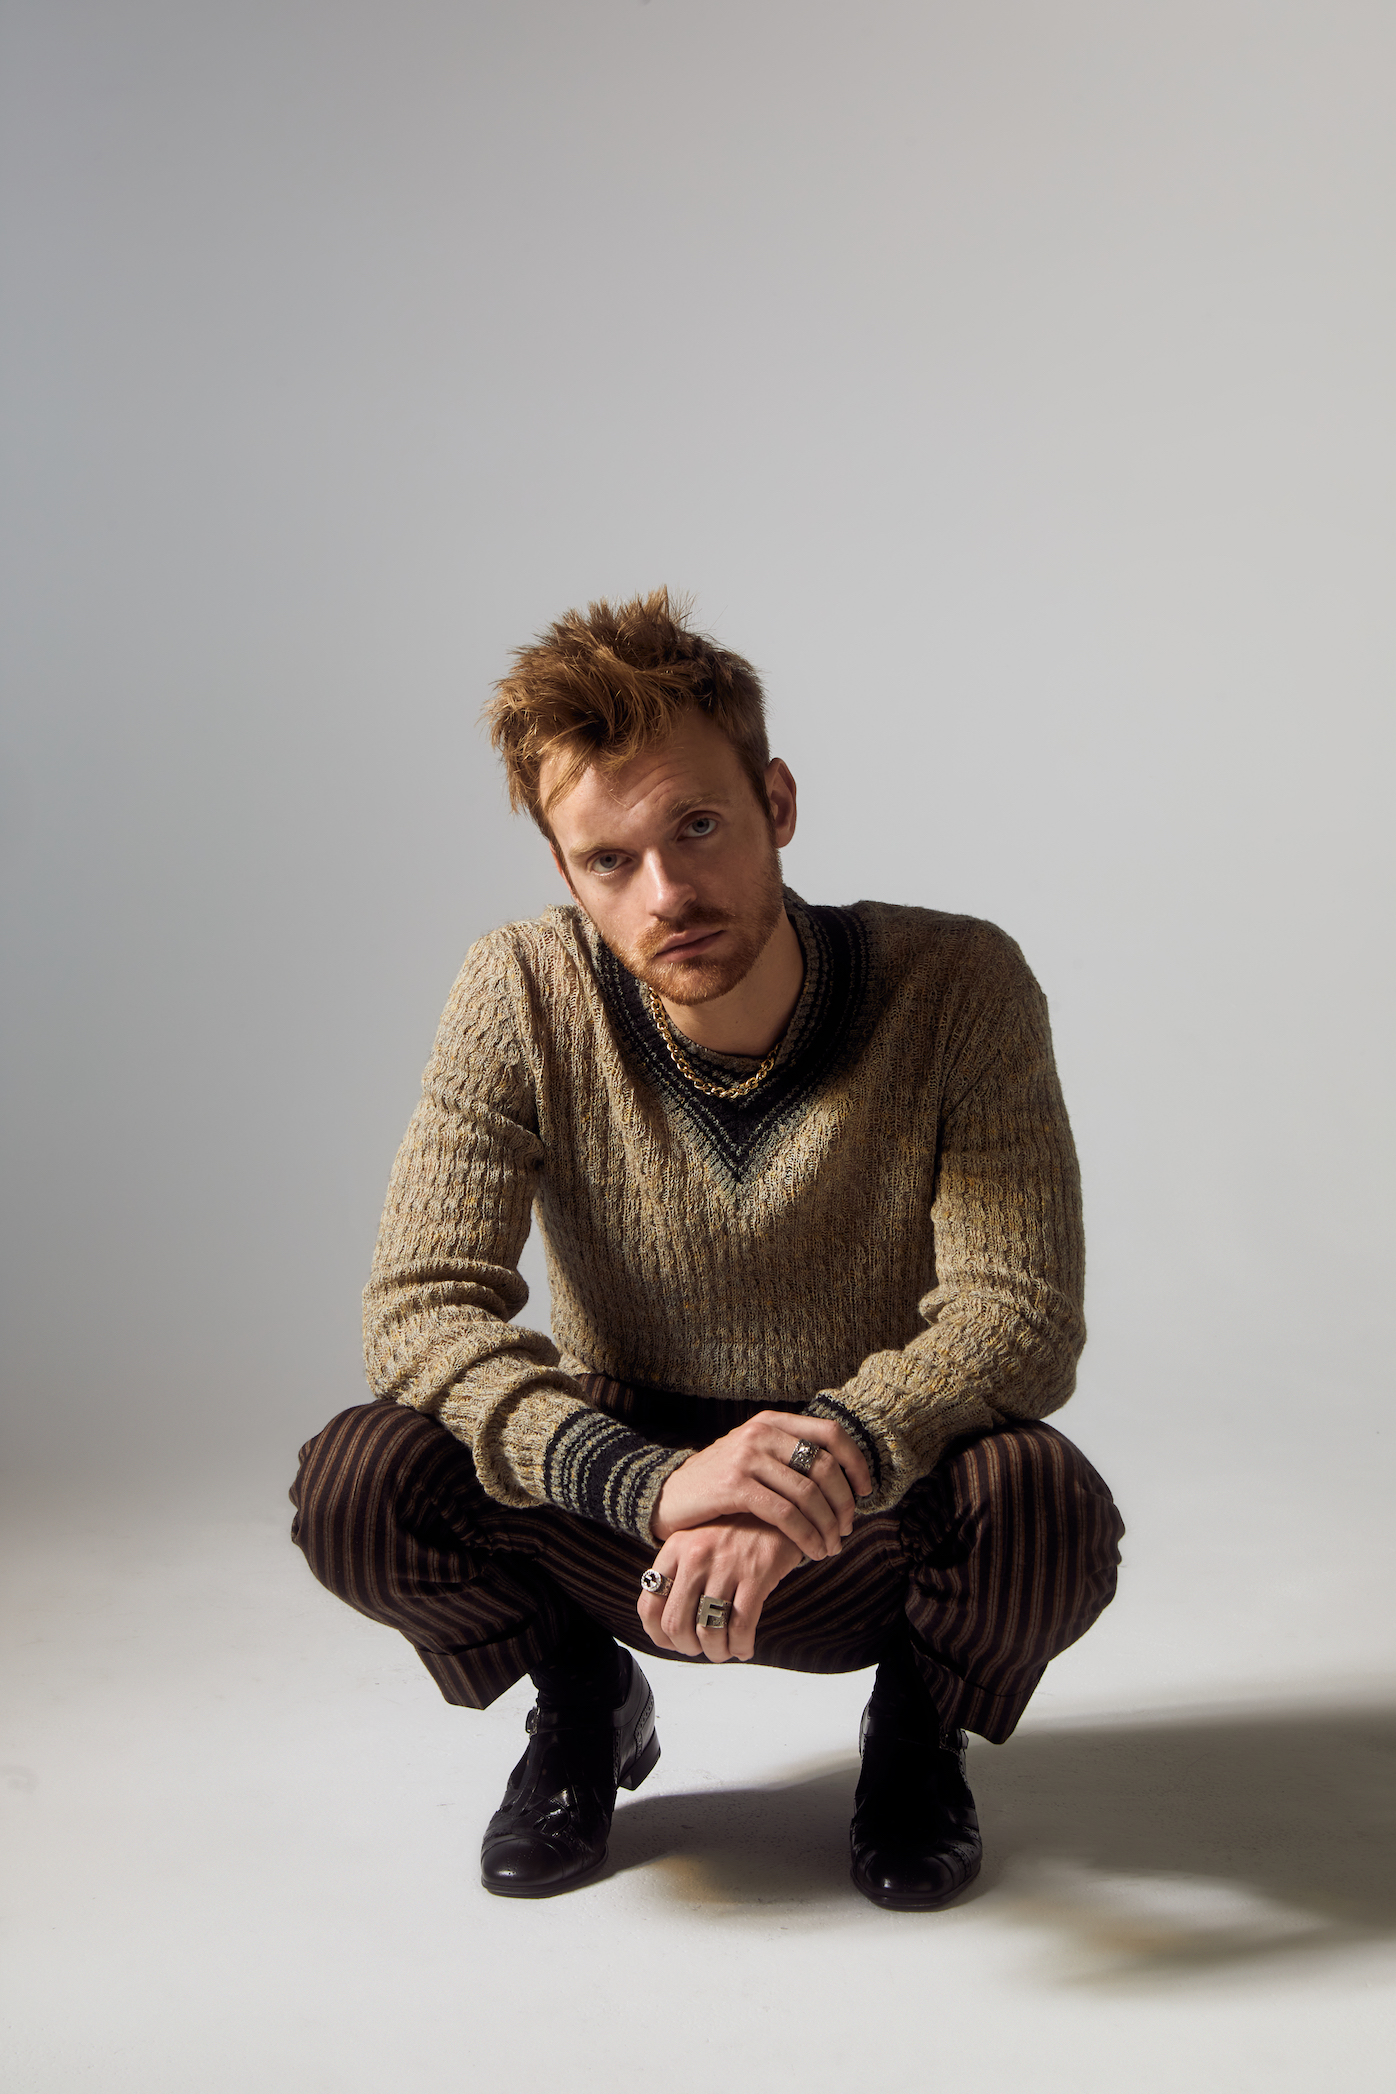 Finneas on COVID-Era Creativity, Not Being Starstruck and His Dream Collaboration